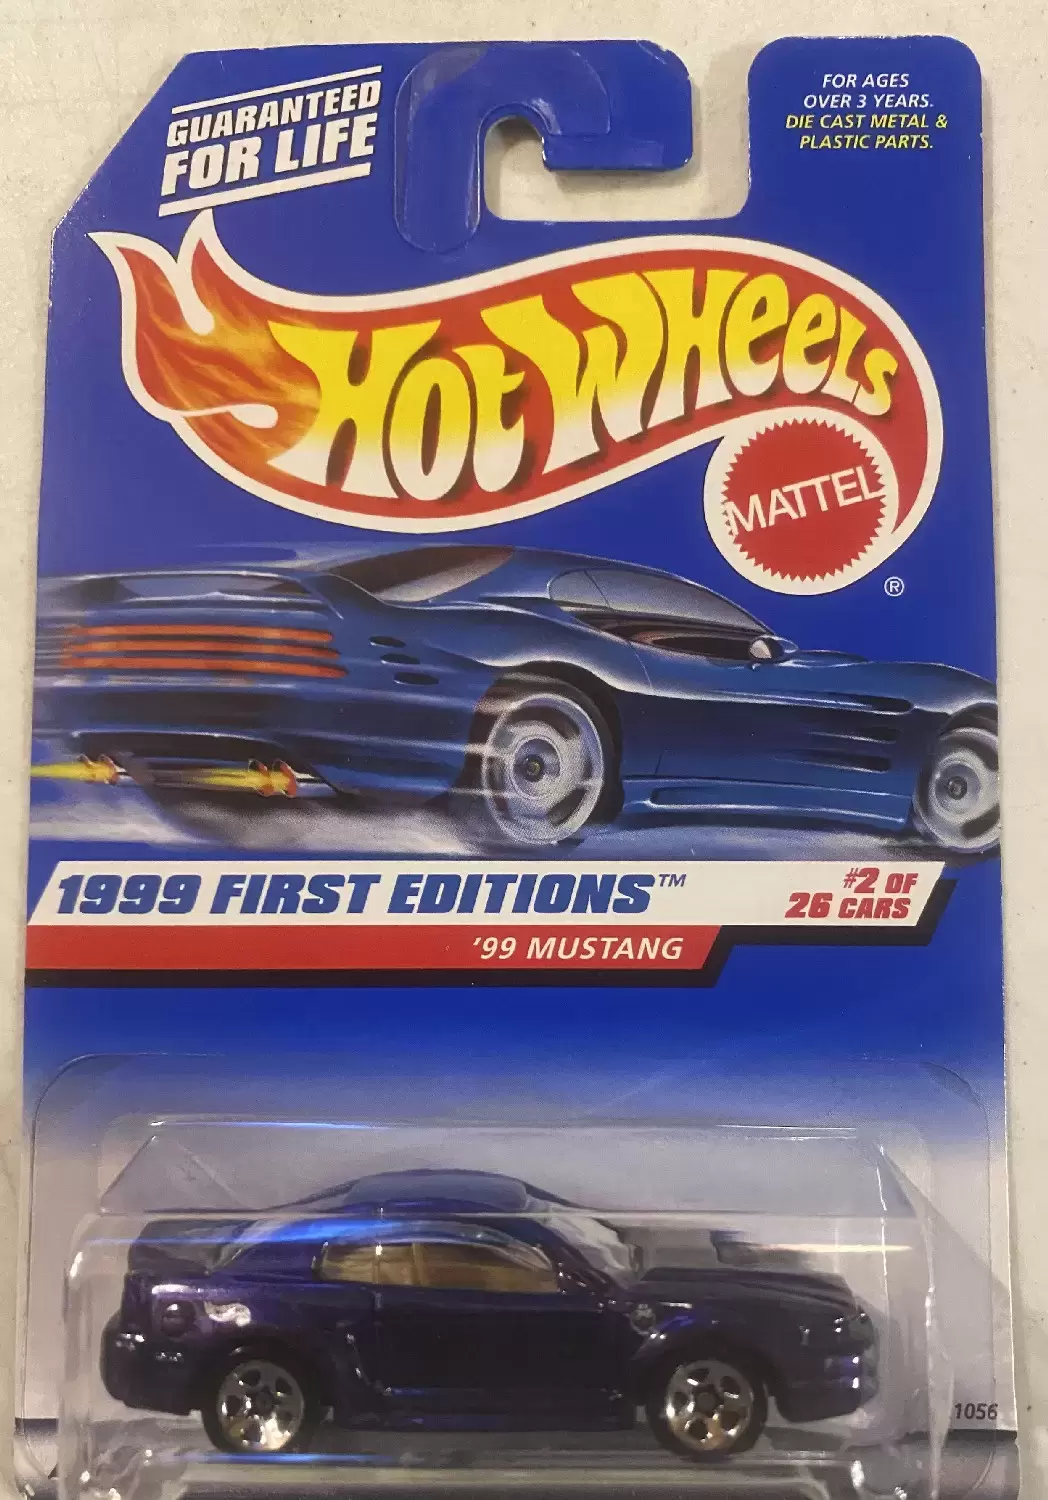 Hot Wheels Classiques - ‘99 Mustang #909 - 1999 First Editions #2 of 26 cars